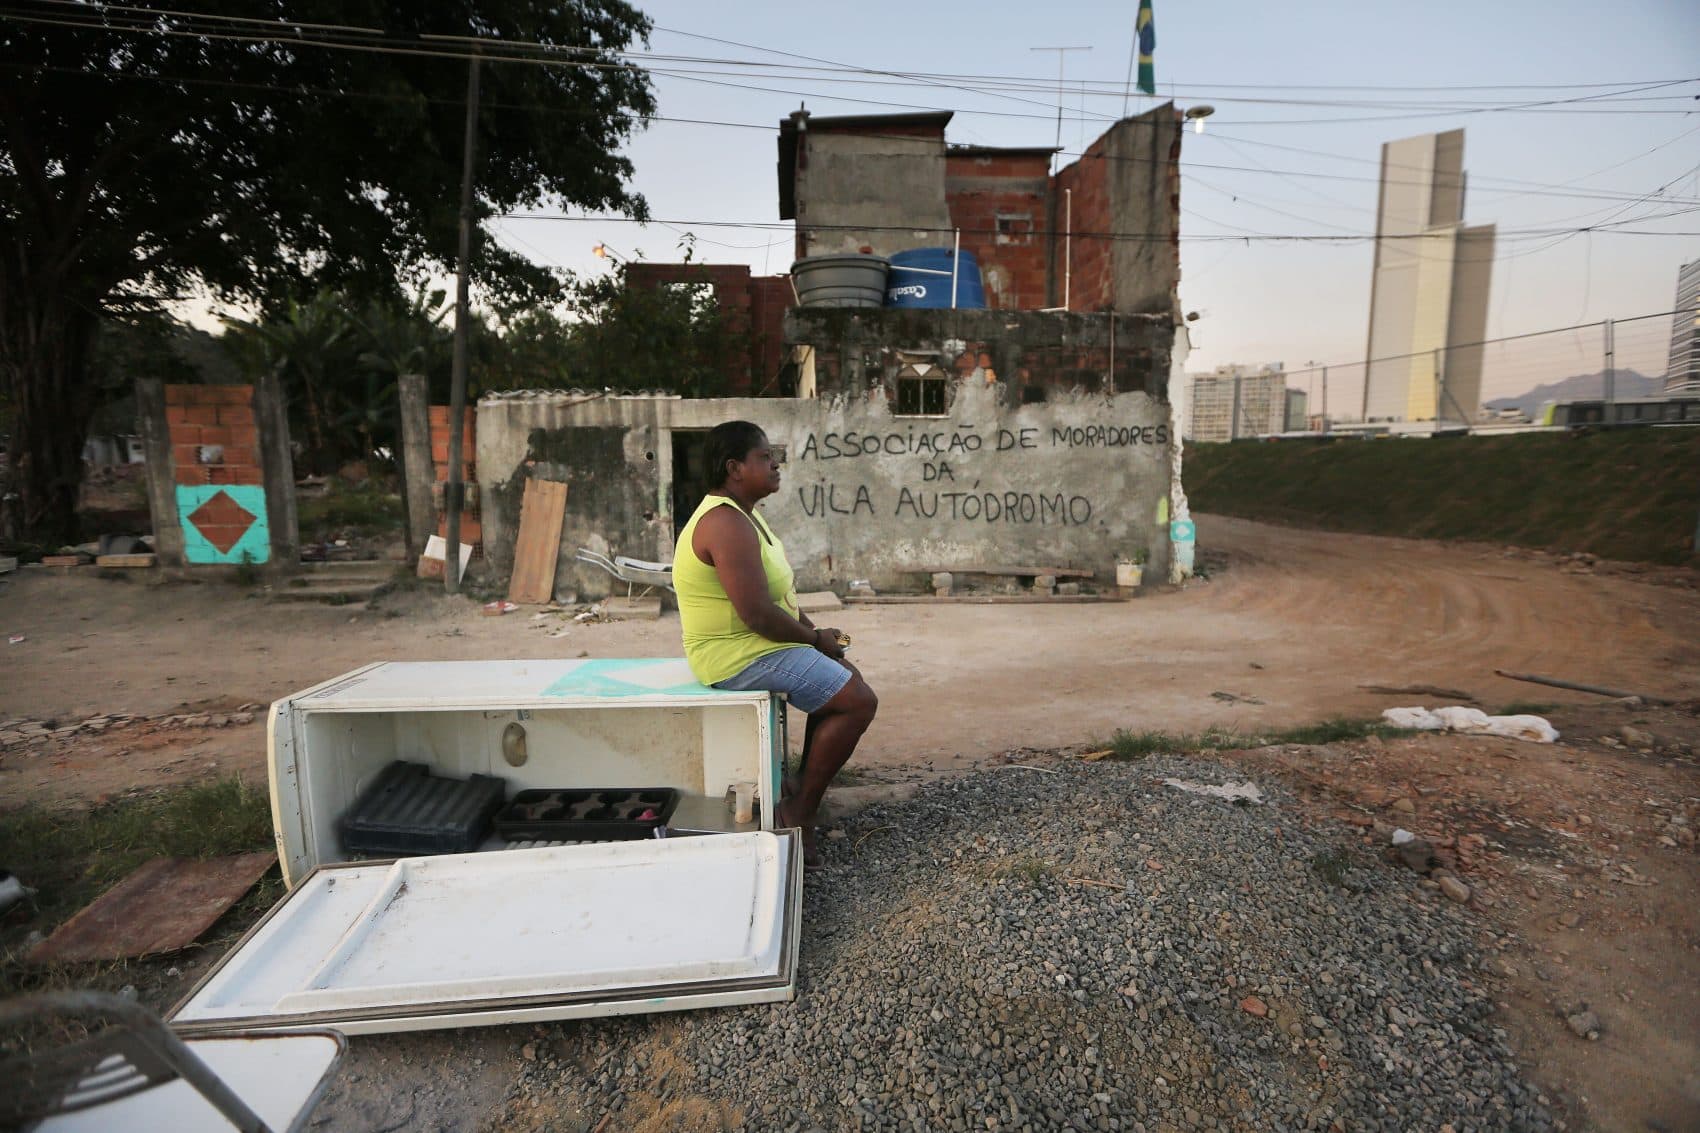 Vila Autodromo, a favela in Rio de Janeiro, was razed in preparation for this month's Olympics. (Mario Tama/Getty Images)